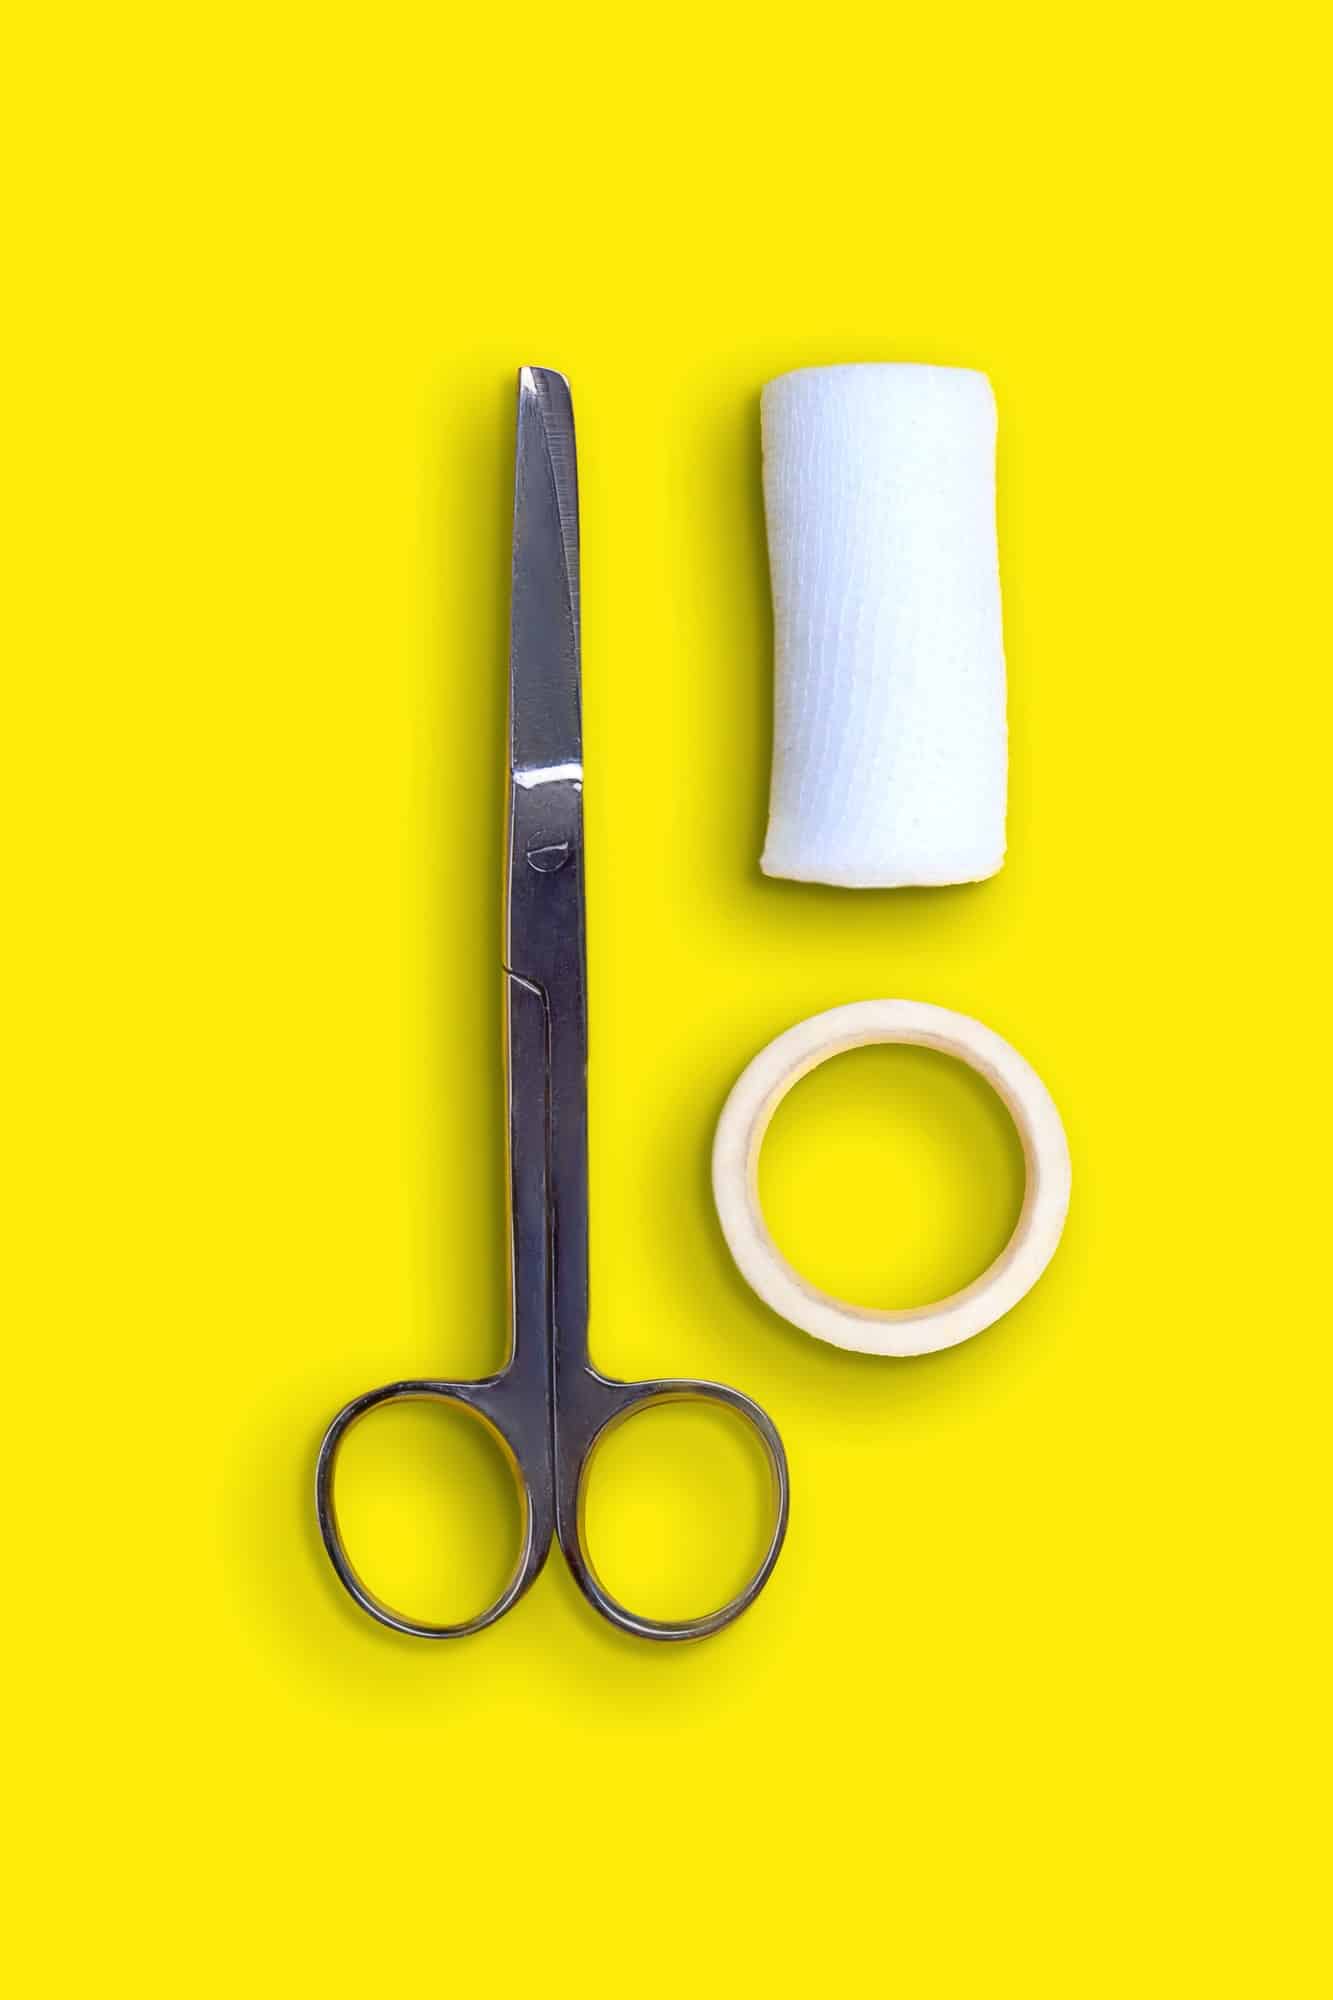 Scissors, bandages and band-aid on yellow background